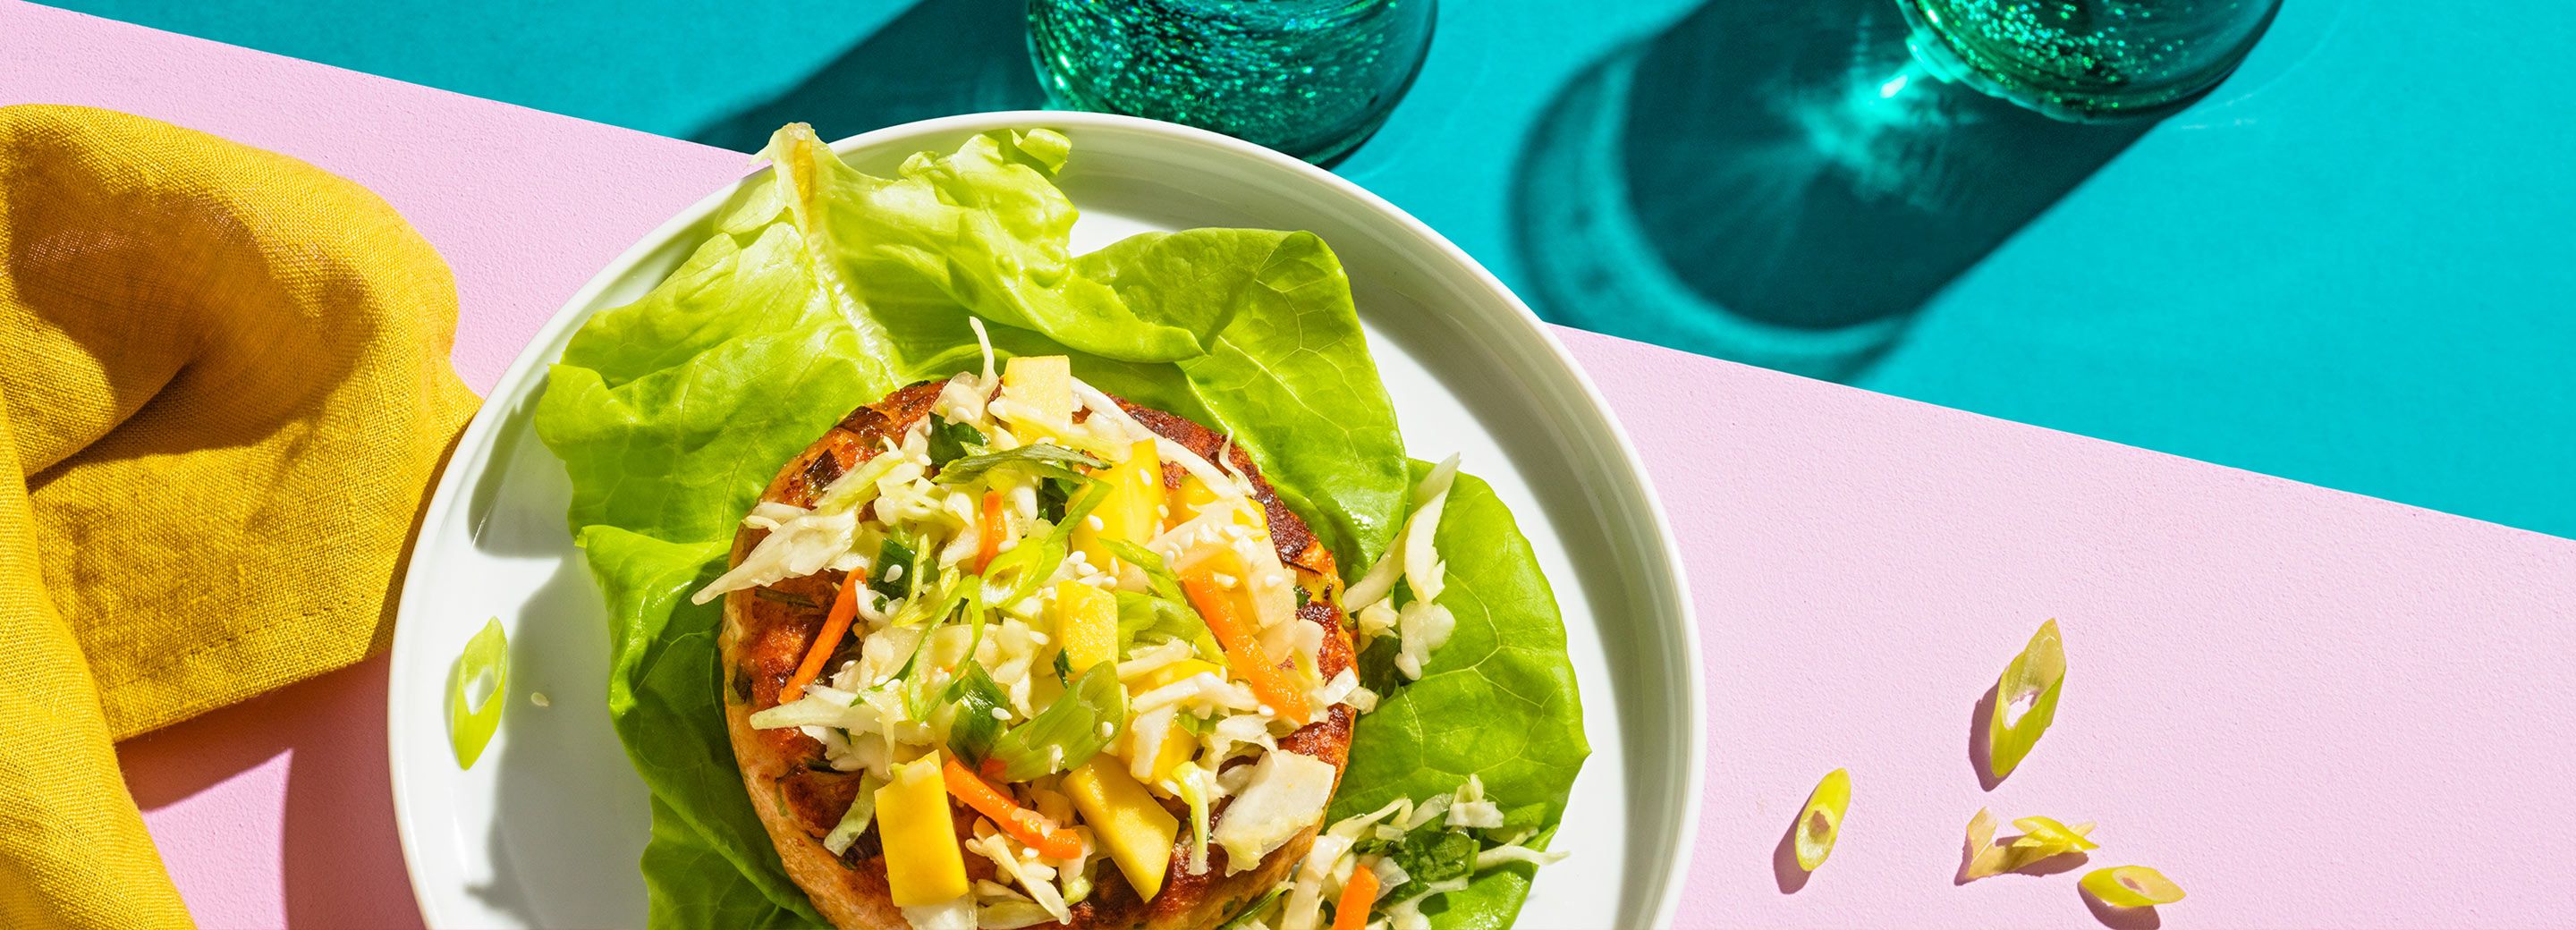 Open-Faced Salmon Burgers with Mango Slaw